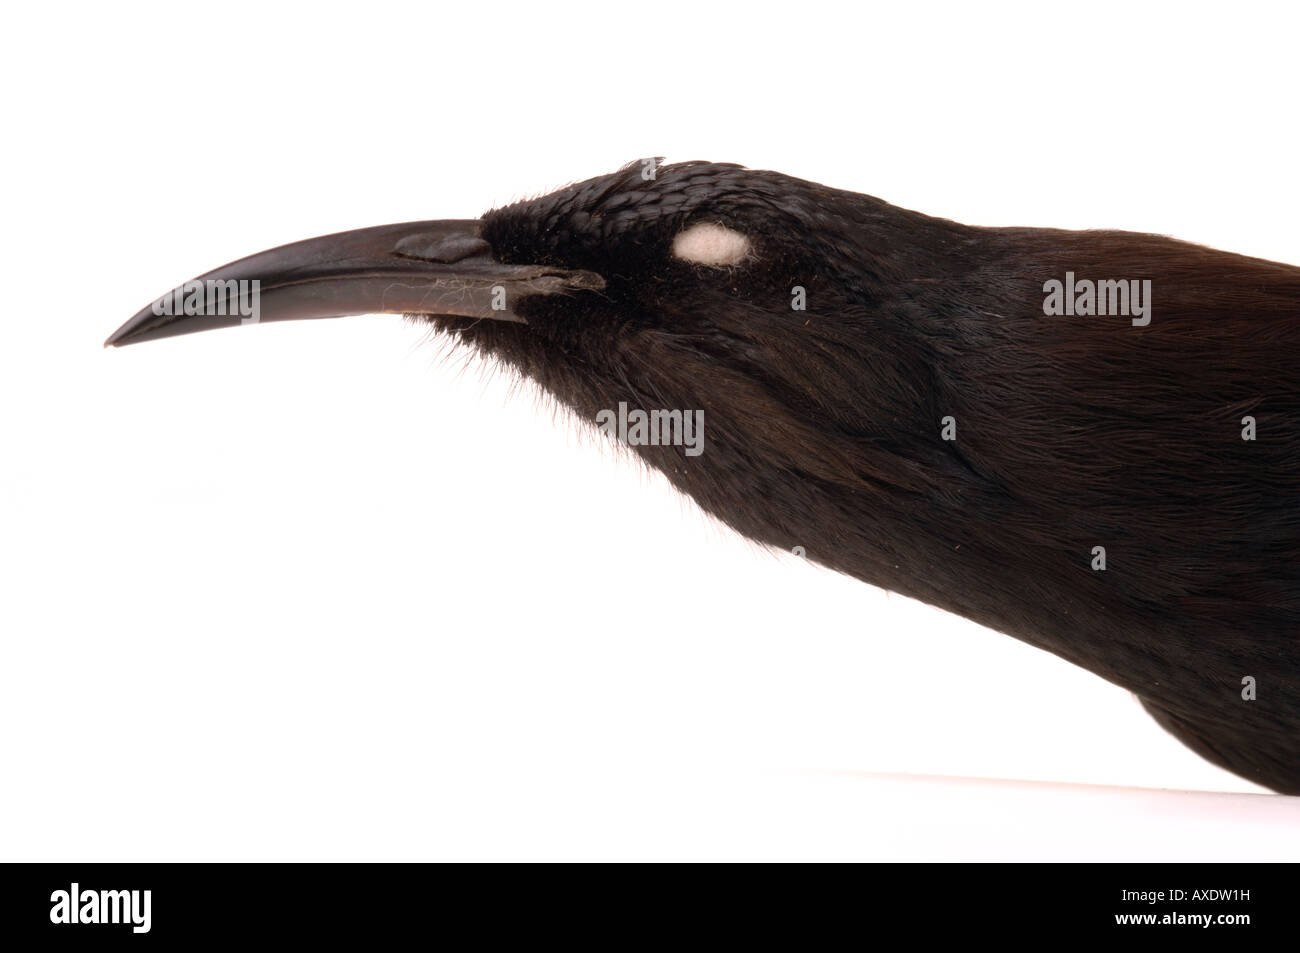 Uccello estinto, Moho nobilis, Hawaii Oo, [0123] YPM 36964, Yale Peabody Museum collection Foto Stock